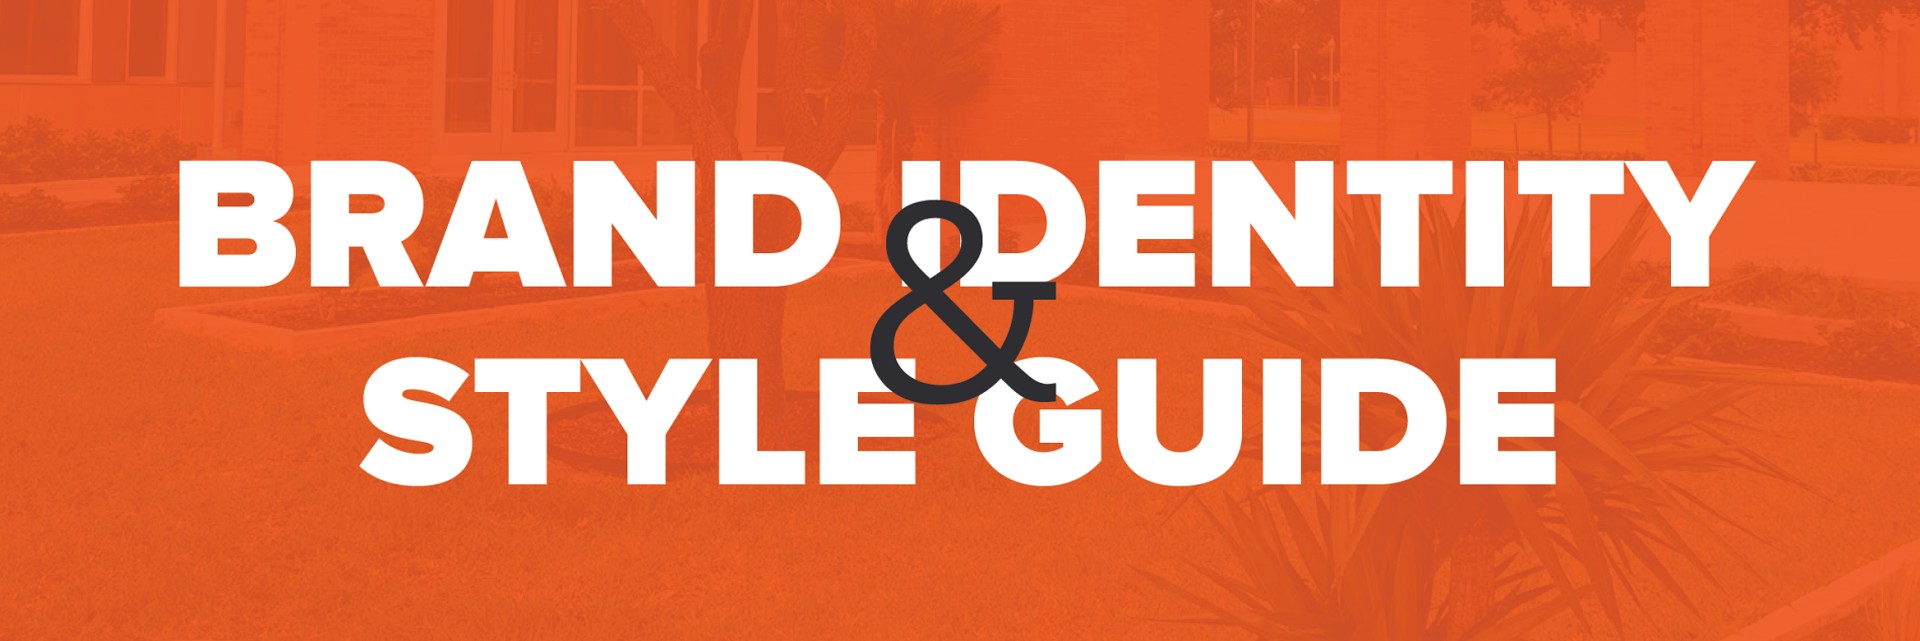 Brand Identity And Style Guide